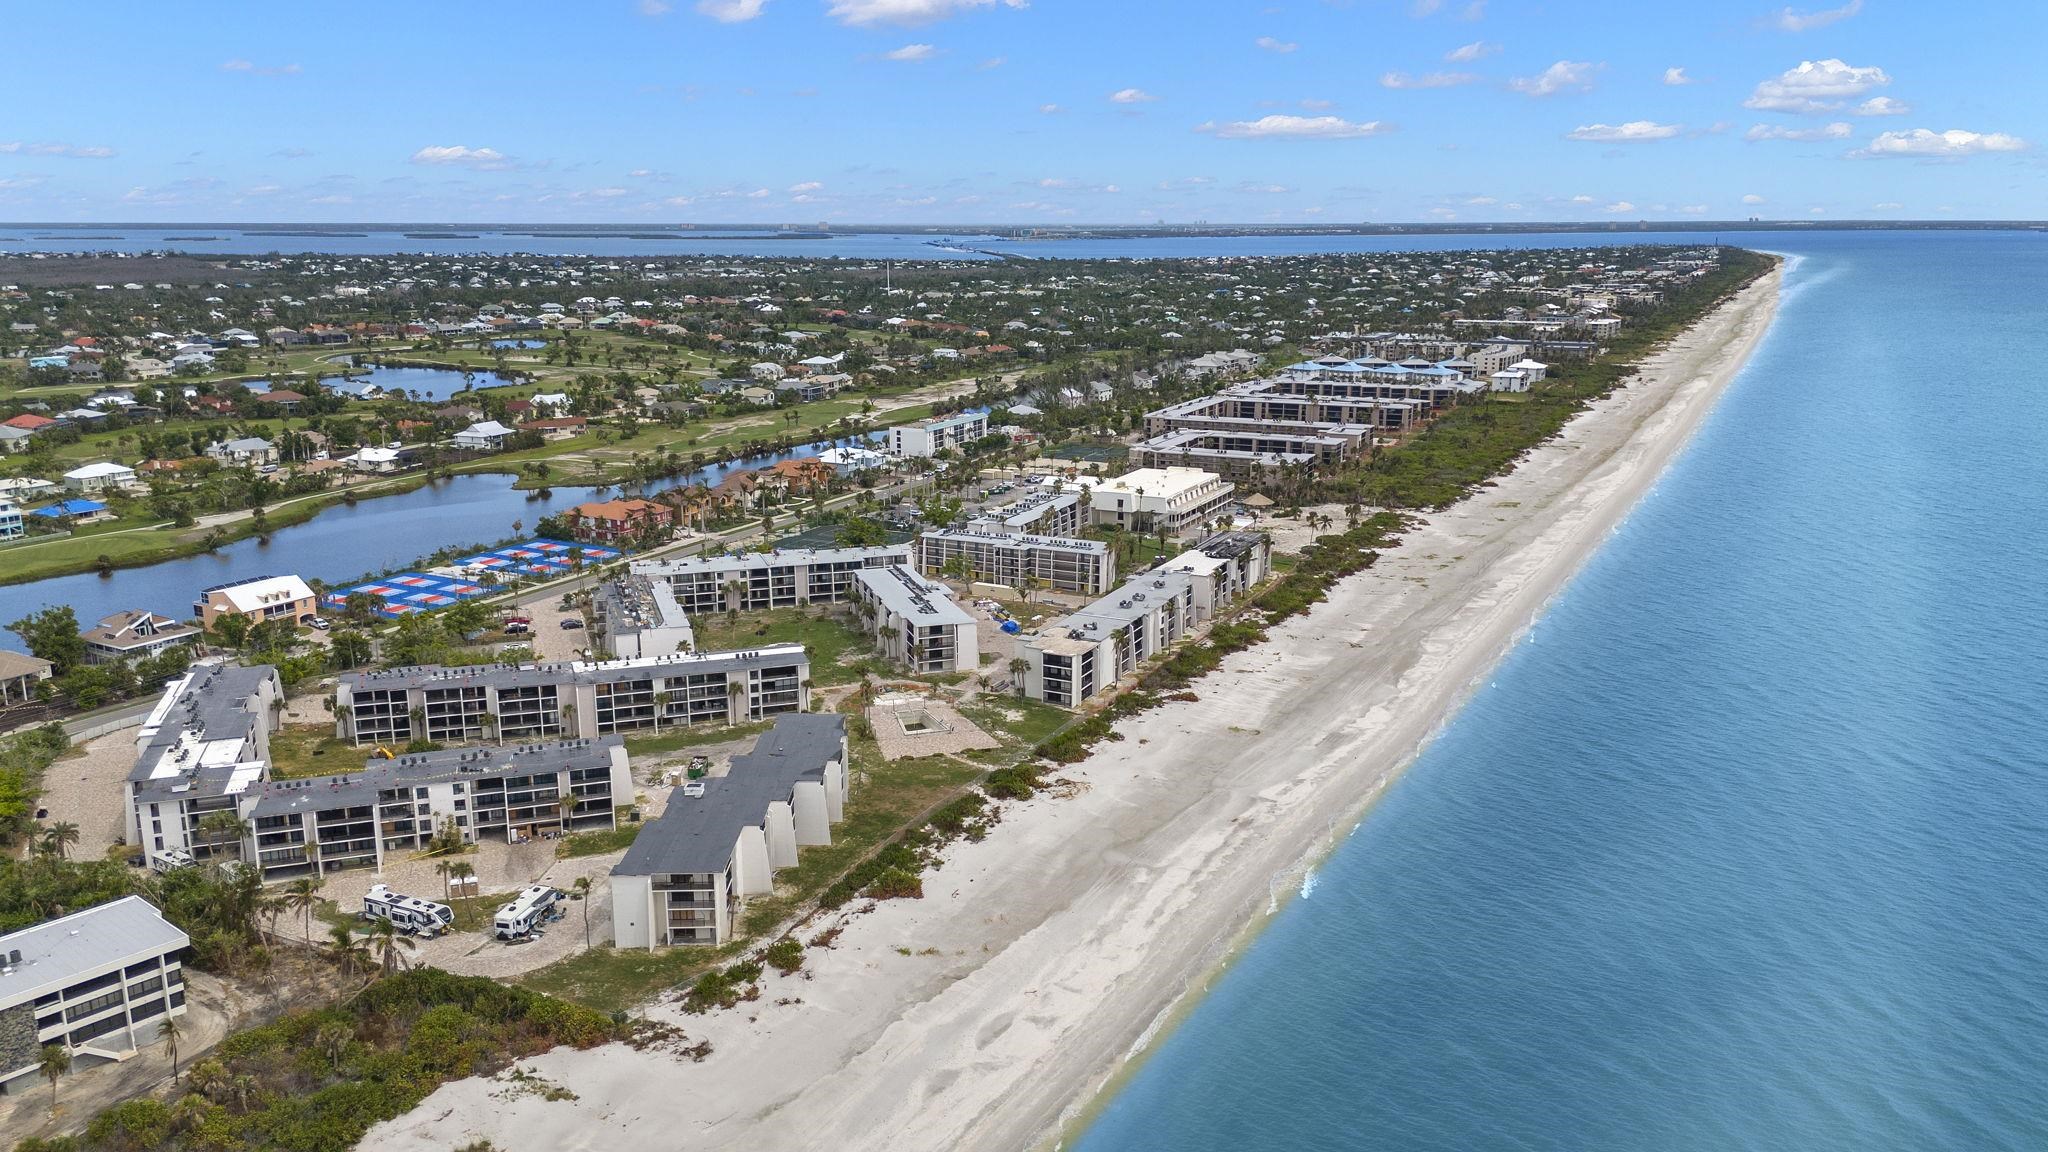 1501 Middle Gulf Drive, Sanibel, Florida 33957, 1 Bedroom Bedrooms, ,1 BathroomBathrooms,Condo,For Sale,Middle Gulf Drive,2230875